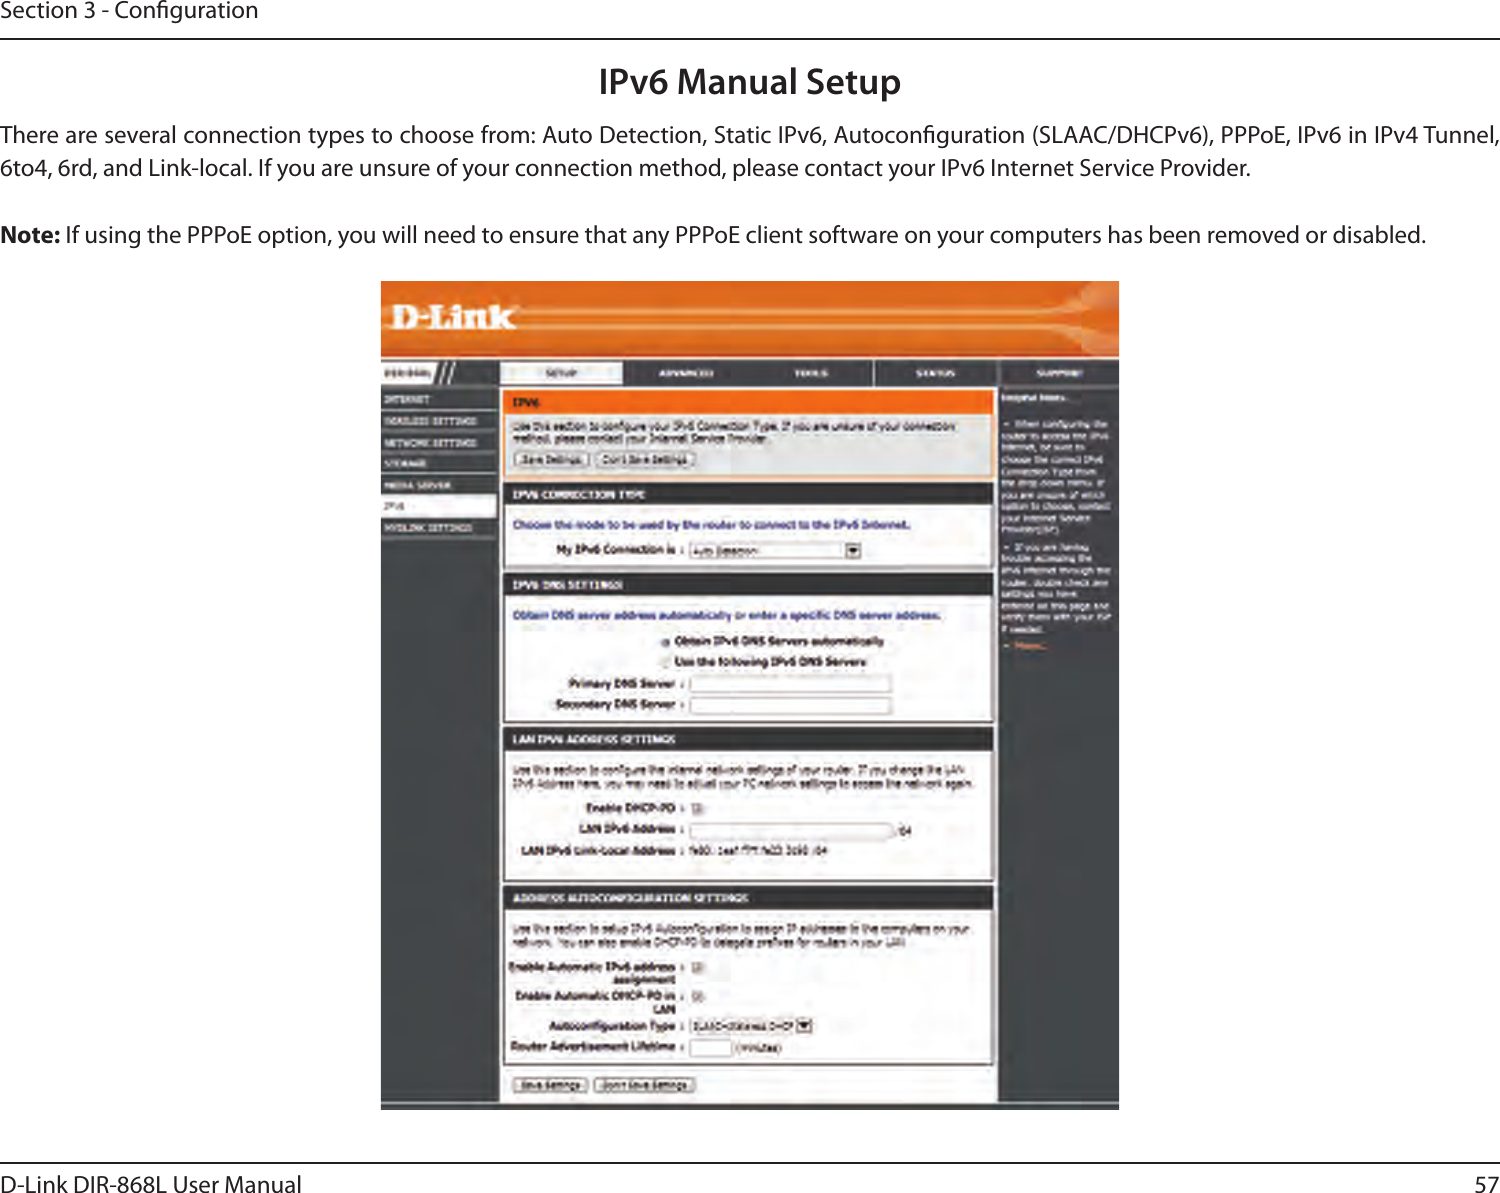 57D-Link DIR-868L User ManualSection 3 - CongurationIPv6 Manual SetupThere are several connection types to choose from: Auto Detection, Static IPv6, Autoconguration (SLAAC/DHCPv6), PPPoE, IPv6 in IPv4 Tunnel, 6to4, 6rd, and Link-local. If you are unsure of your connection method, please contact your IPv6 Internet Service Provider. Note: If using the PPPoE option, you will need to ensure that any PPPoE client software on your computers has been removed or disabled.